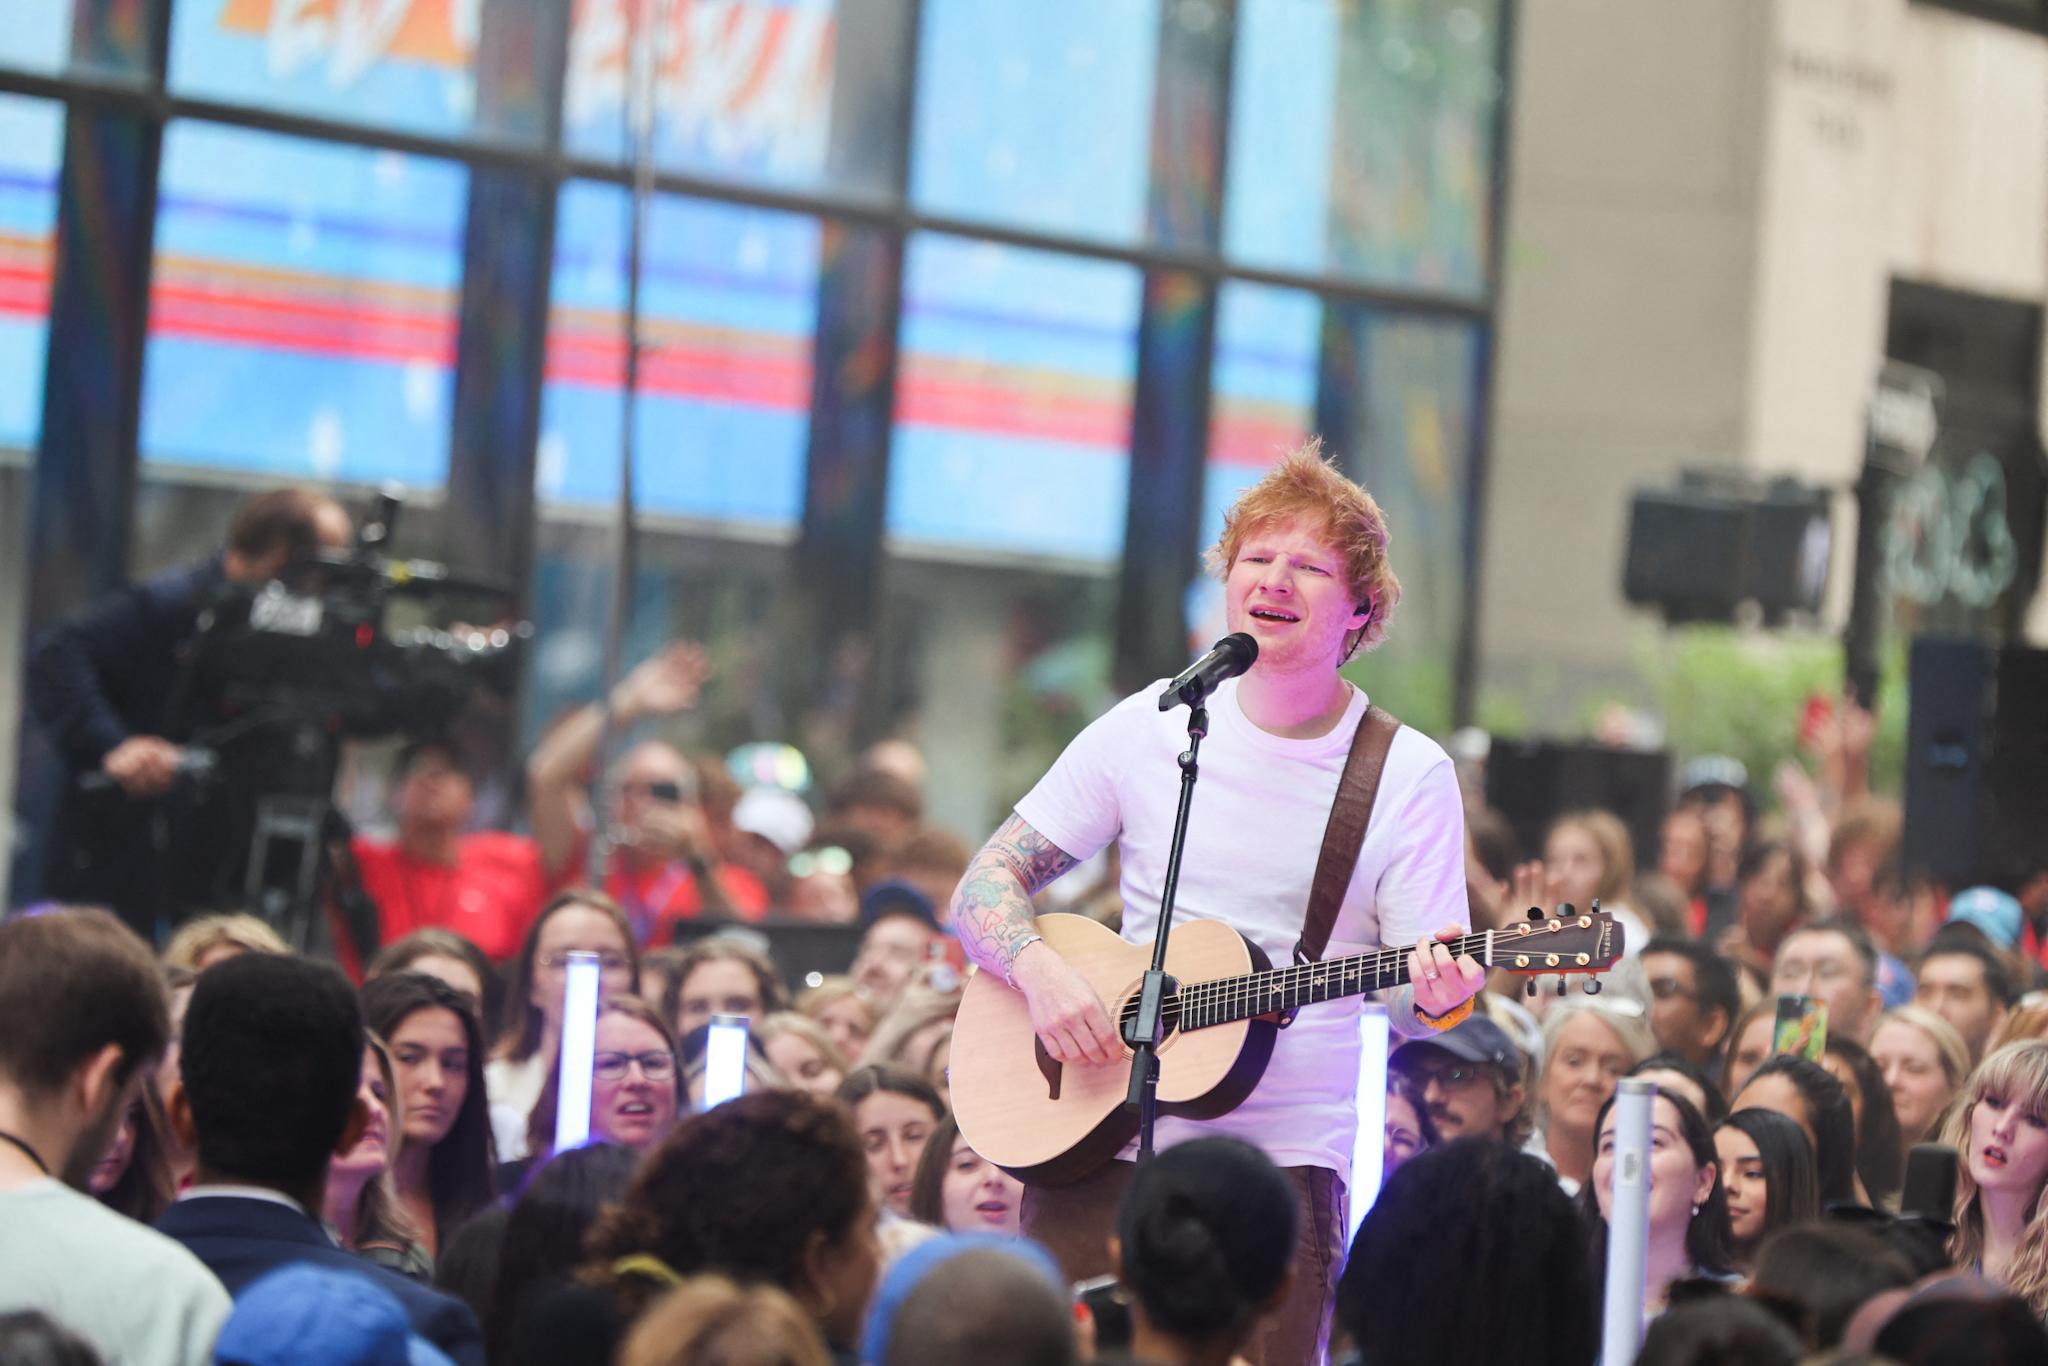 Singer Ed Sheeran seen performing a concert on the Today Show Plaza in NYC